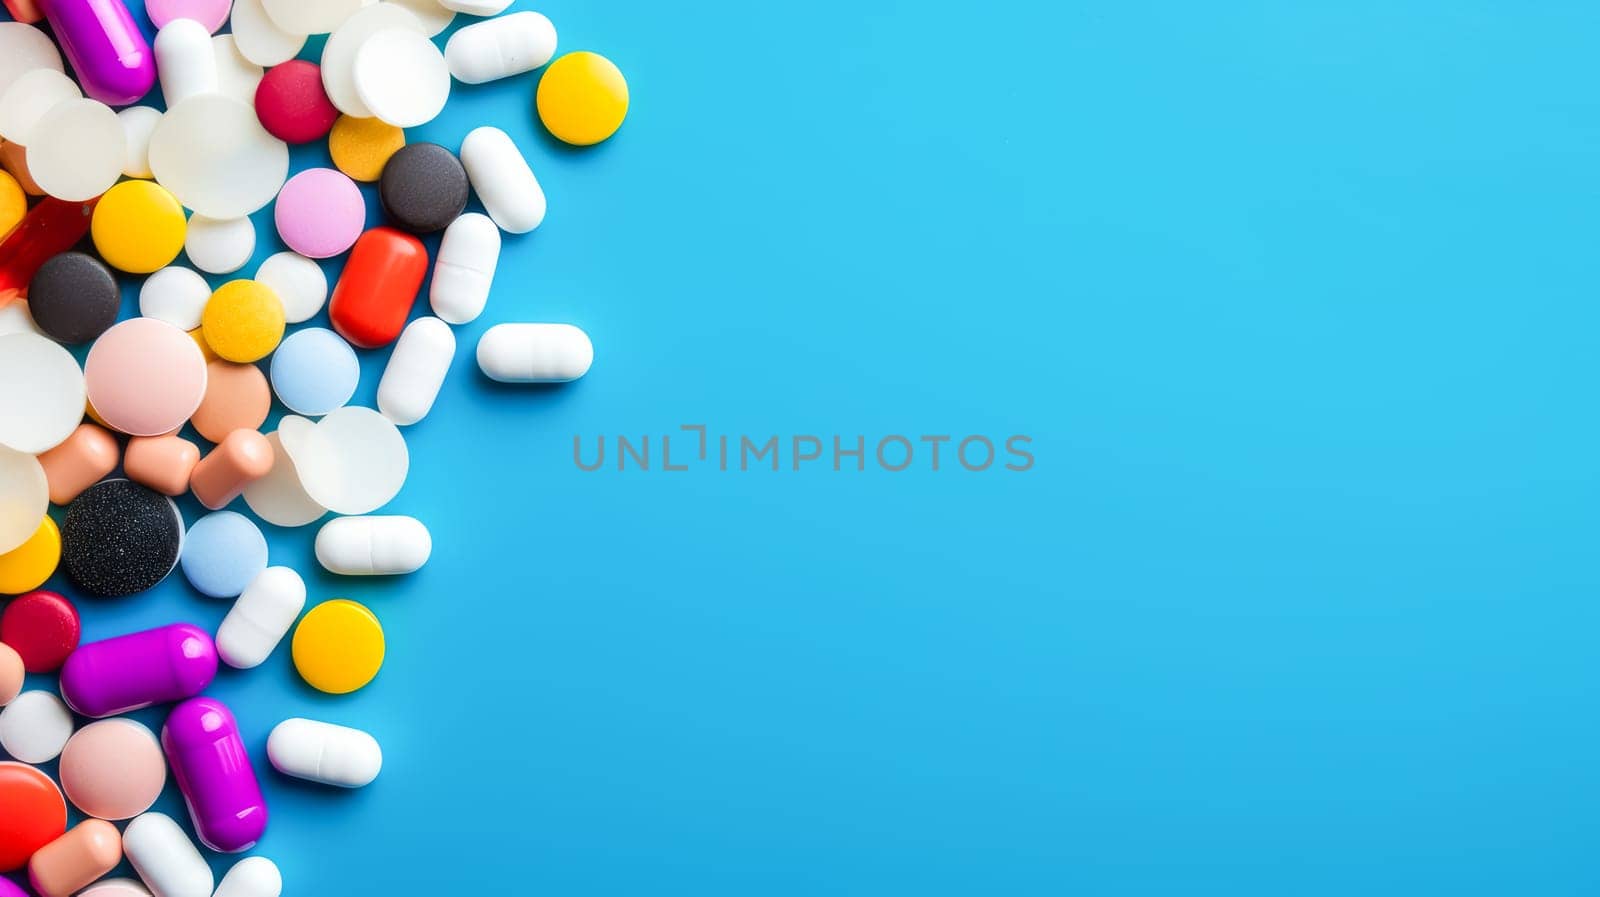 Multi-colored bright tablets on a white background. Medicine, treatment in a medical institution, healthy lifestyle, medical life insurance, pharmacies, pharmacy, treatment in a clinic.